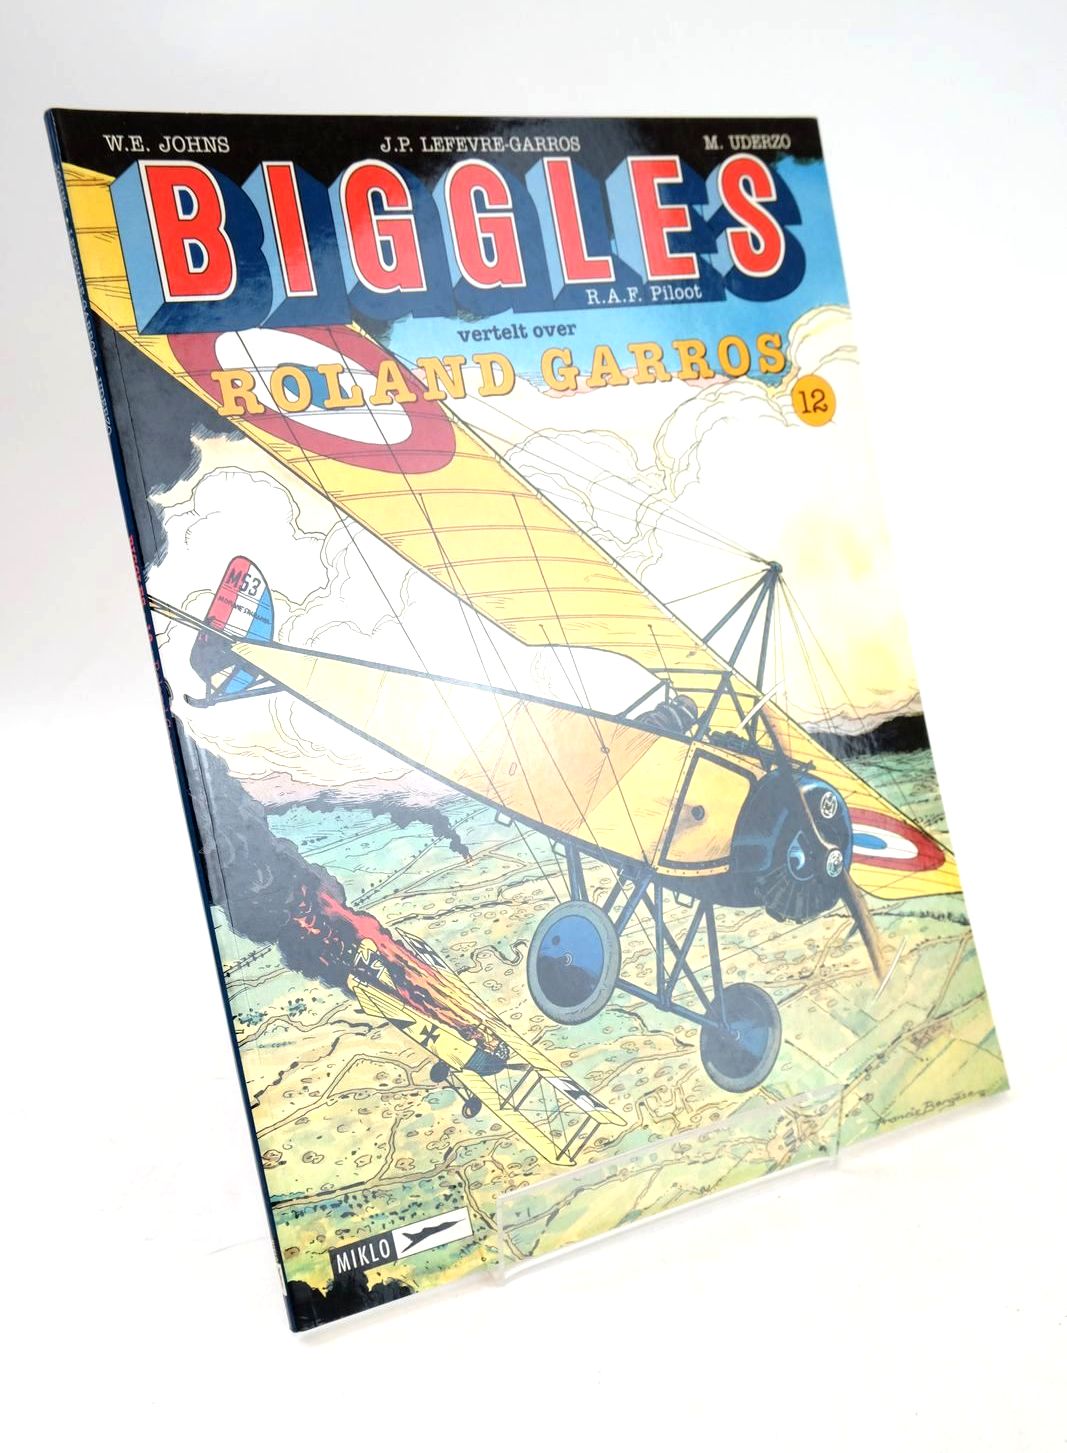 Photo of BIGGLES R.A.F. PILOTE VERTELT OVER... ROLAND GARROS written by Johns, W.E. Lefevre-Garros, Jean-Pierre Blond, Joseph illustrated by Uderzo, M. published by Miklo (STOCK CODE: 1326332)  for sale by Stella & Rose's Books